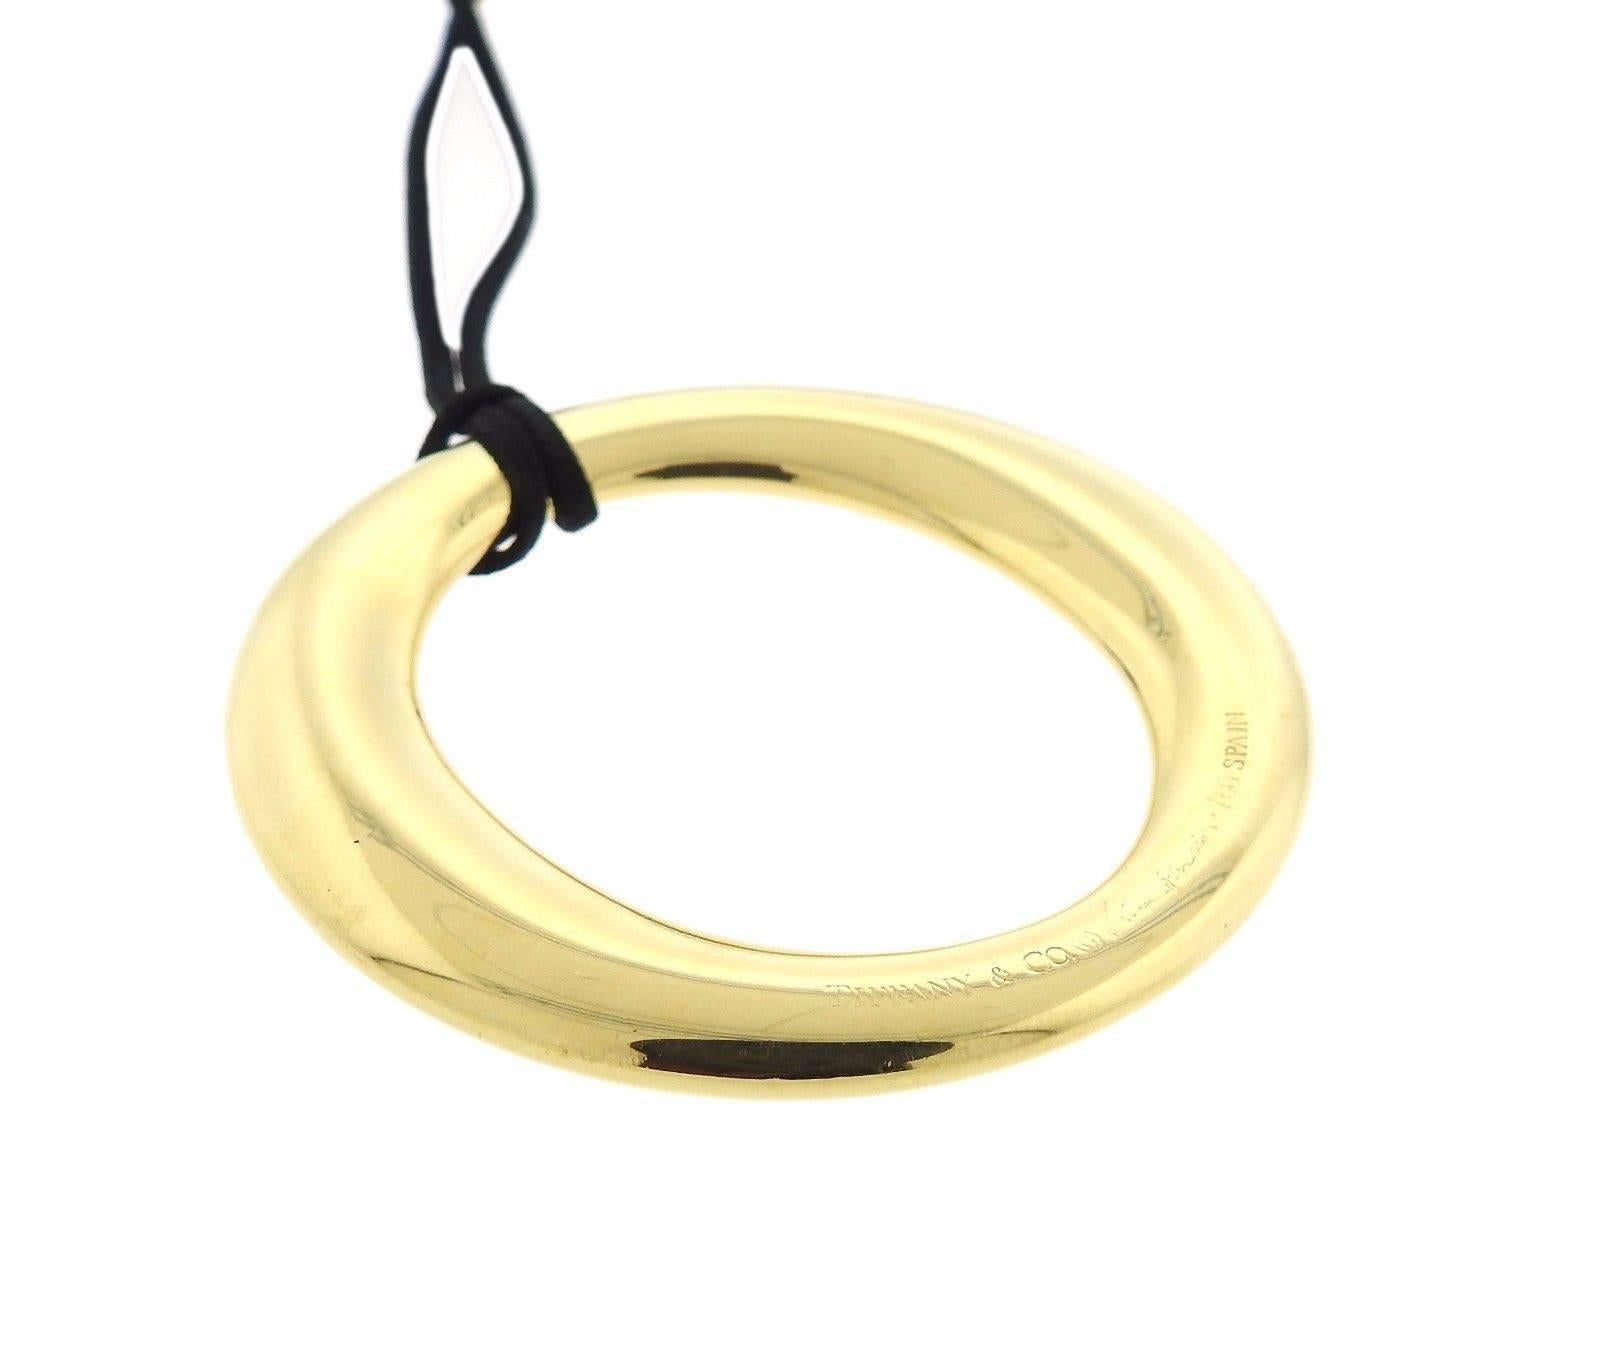 18k gold Sevillana pendant, suspended on a black cord, designed by Elsa Peretti for Tiffany & Co. Cord is 28" long, pendant - 50mm in diameter. Marked: Tiffany & Co, Elsa Peretti, 750, Spain . Weight: 13.1 grams
Comes with pouch 
